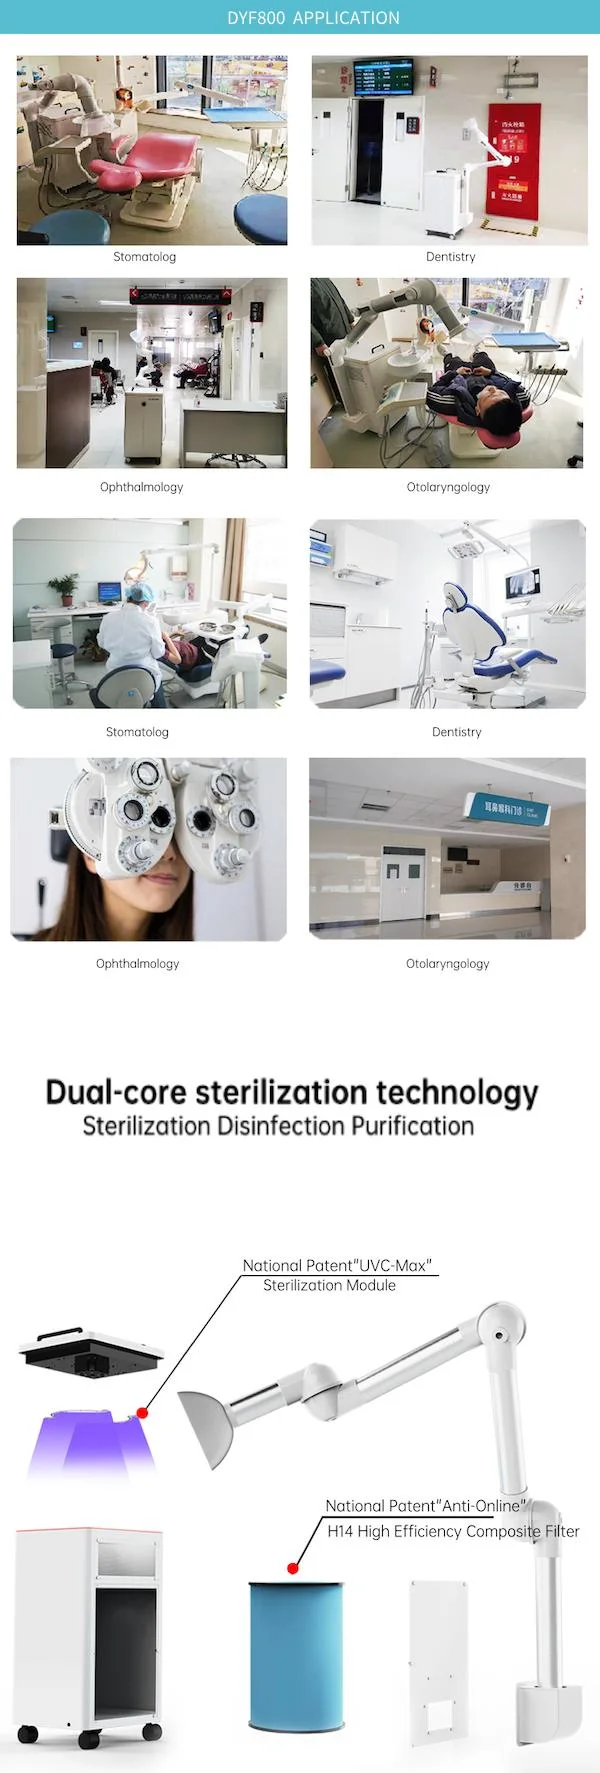 Hospital Dentistry Oral Specialized Avoiding Cross Infection UVC-LED Sterilization Anti Viruses&Bacteria Air Disinfection Sterilizer Medical Dental Device